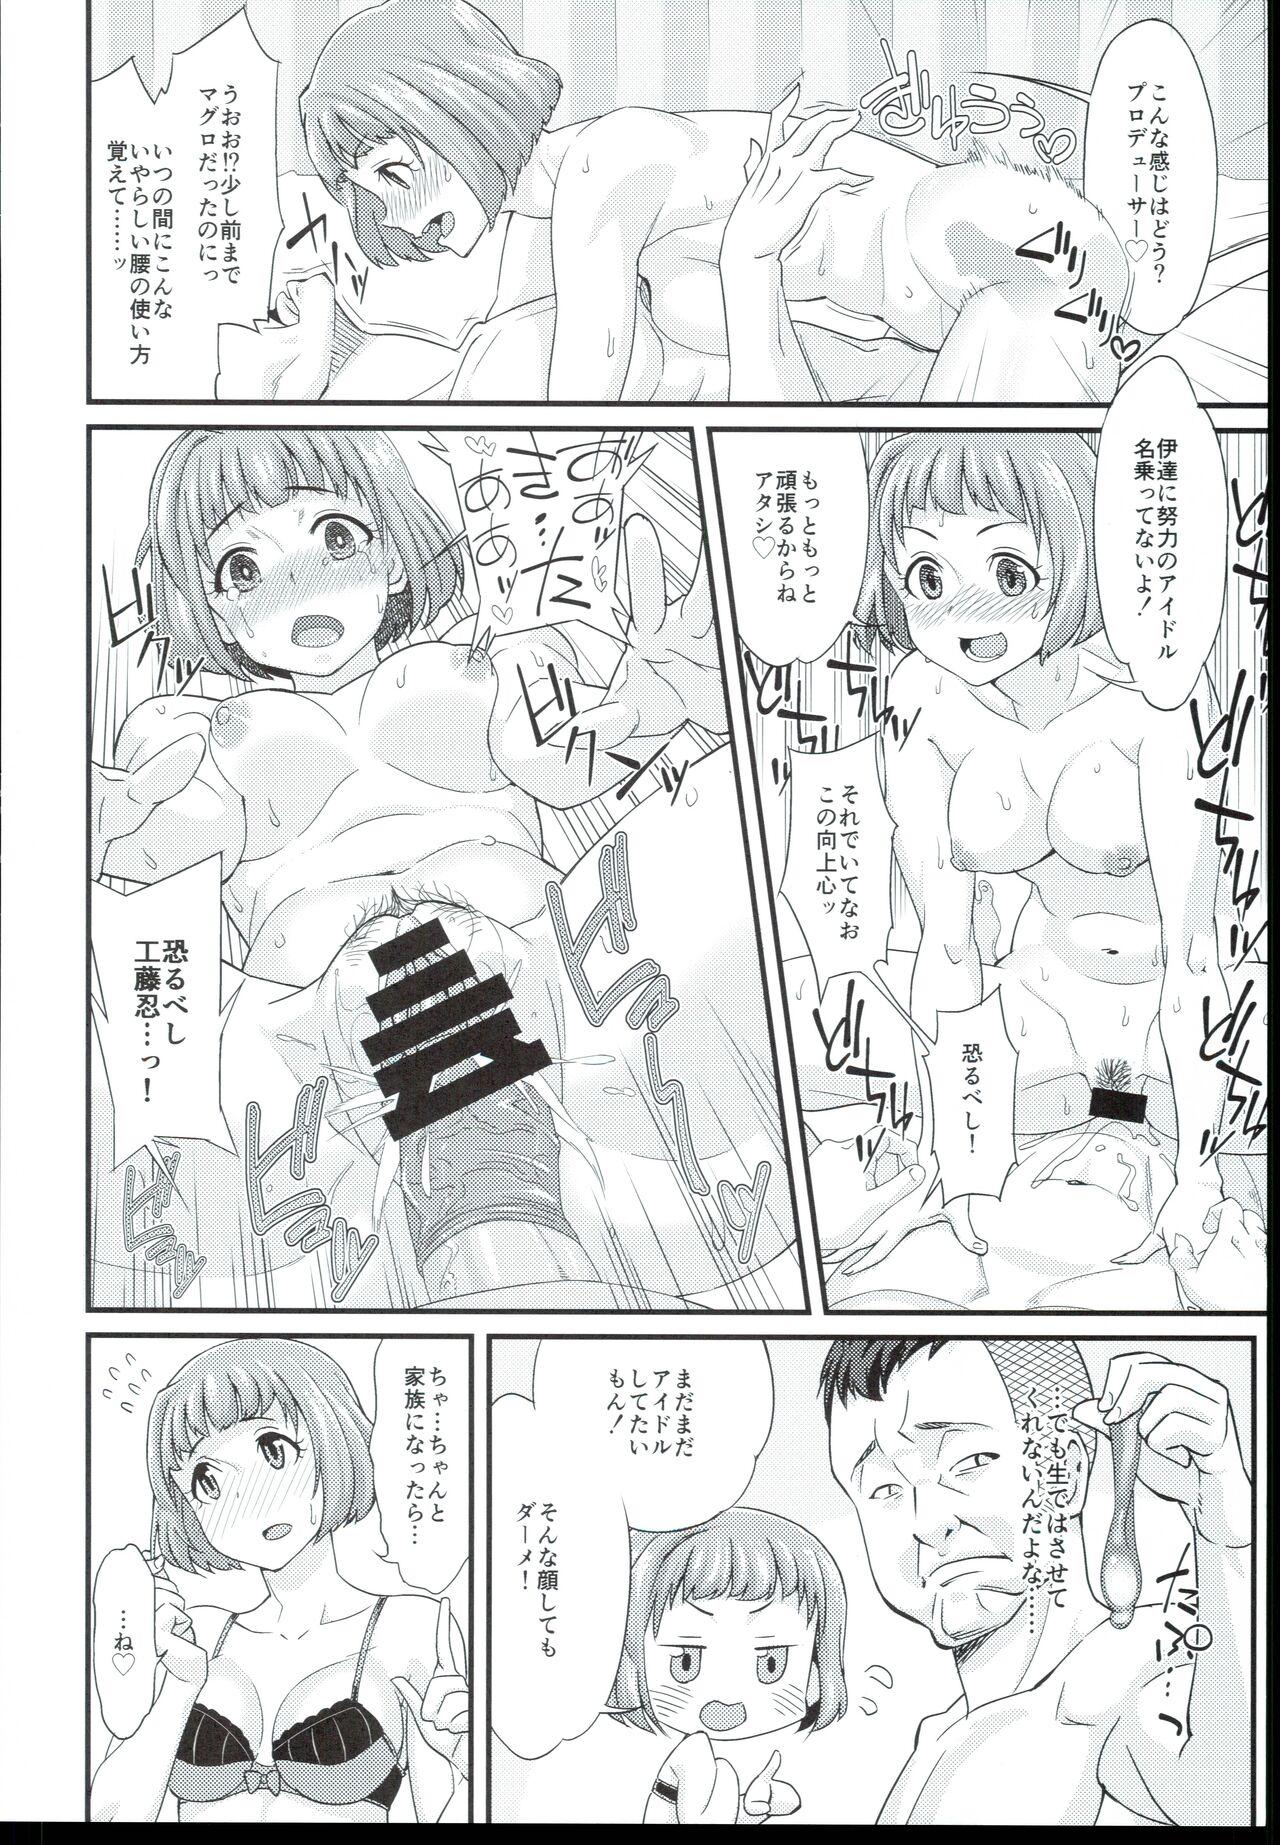 Girls FRILLED SQUARE no Erohon FRISQE - The idolmaster Family - Page 12